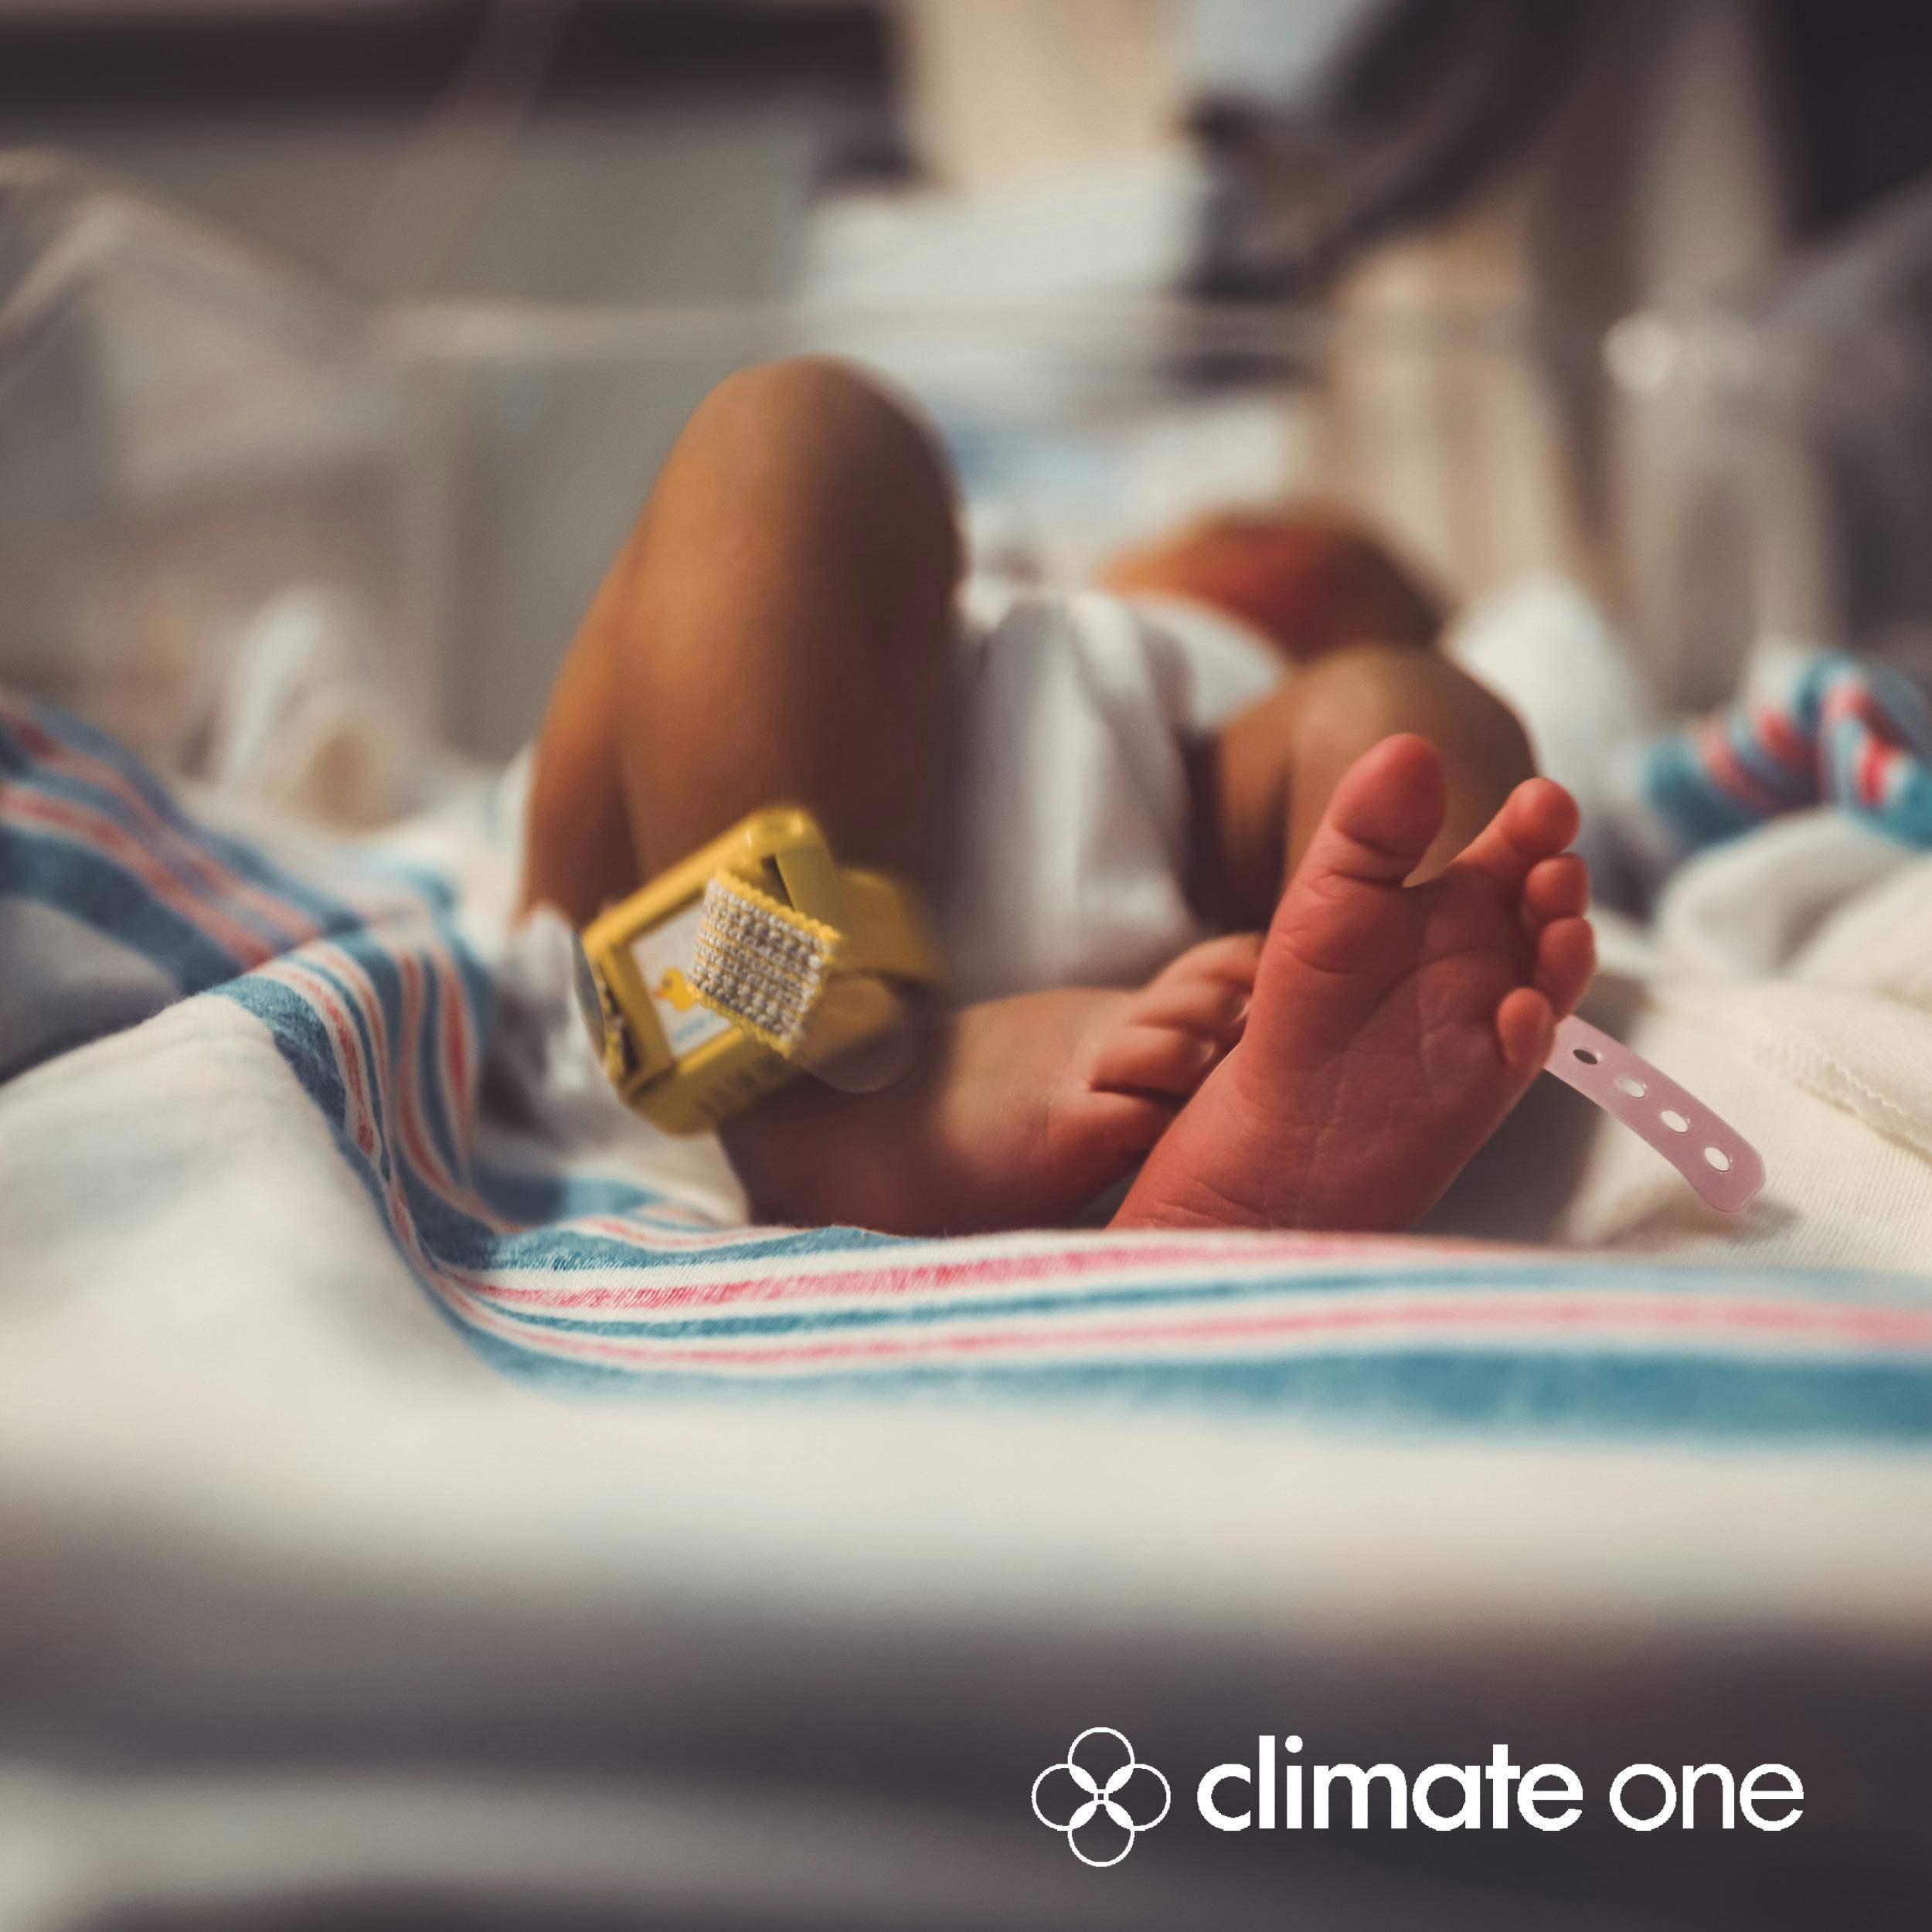 REWIND: Should We Have Children in a Climate Emergency?